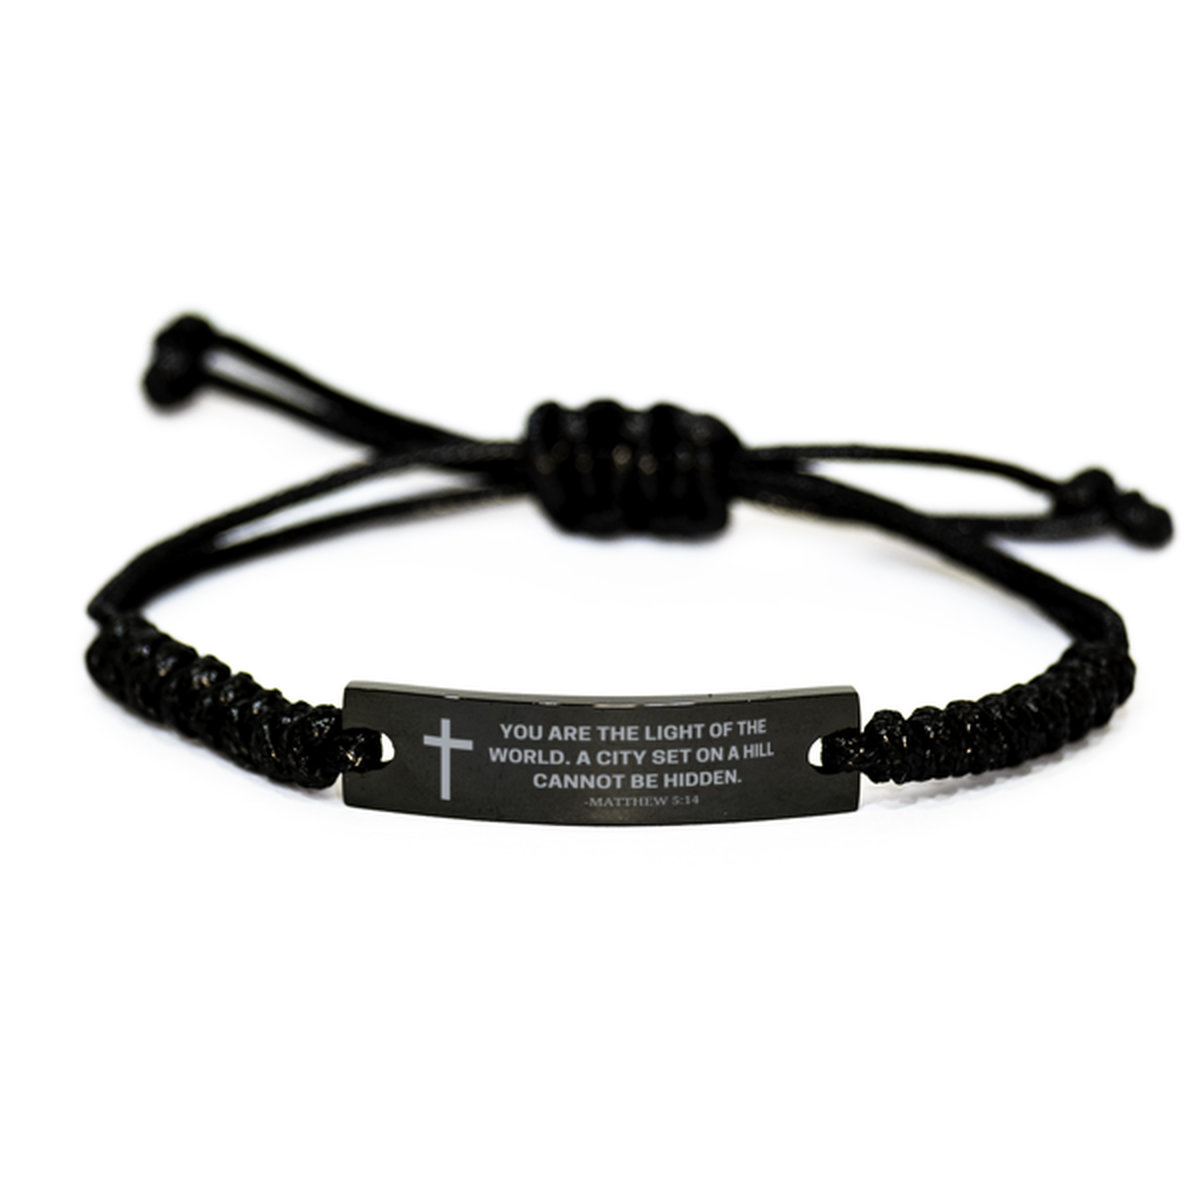 Baptism Gifts For Teenage Boys Girls, Christian Bible Verse Black Rope Bracelet, You are the light of the world, Catholic Confirmation Gifts for Son, Godson, Grandson, Nephew